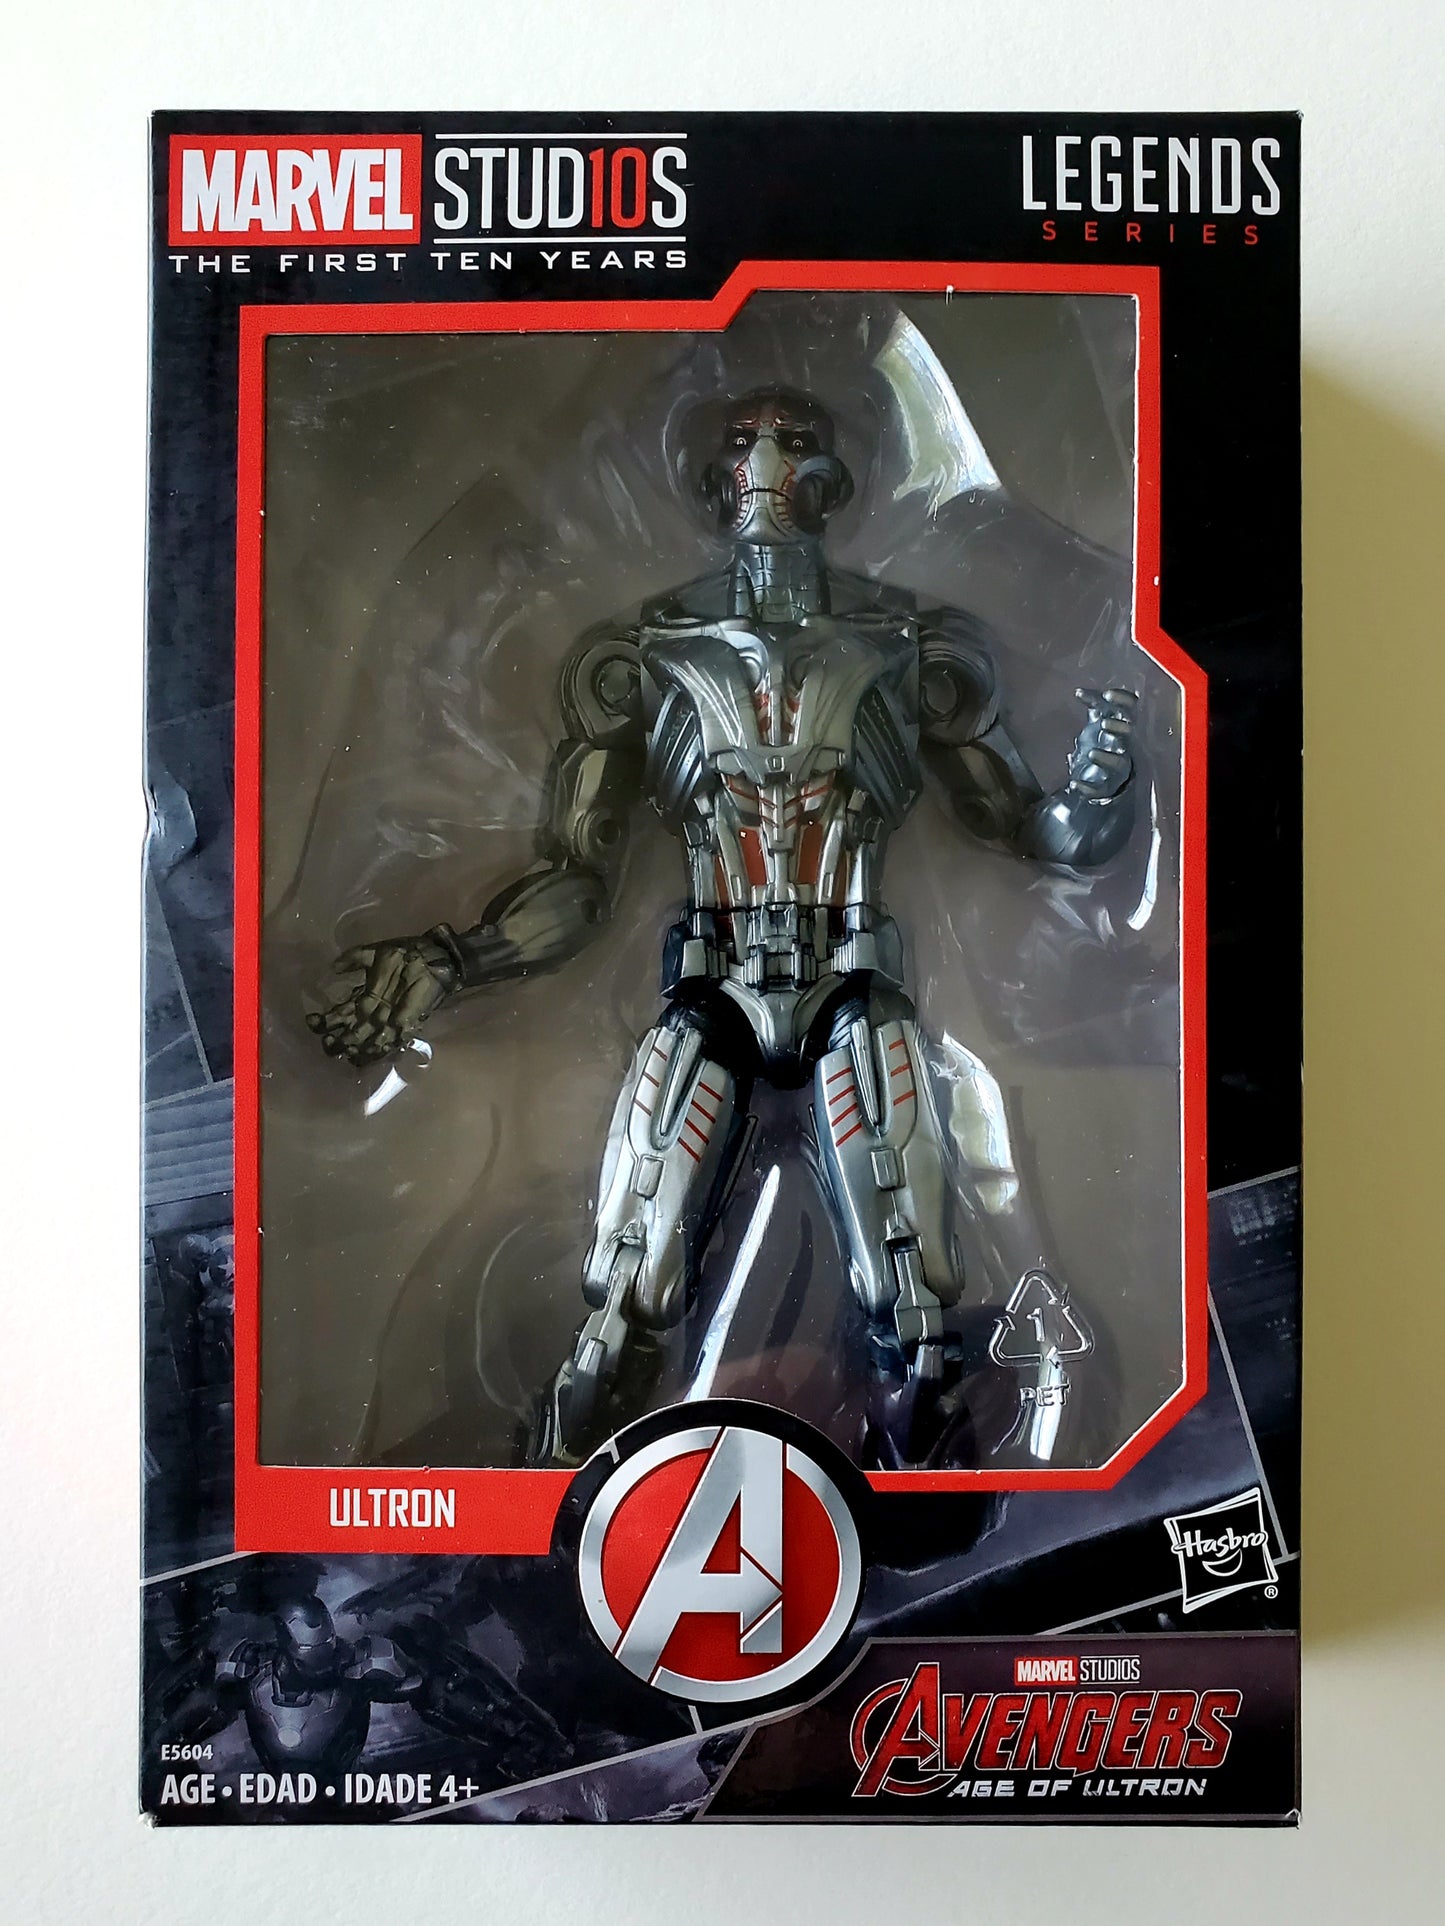 Marvel Studios: The First Ten Years Ultron Prime from Avengers: Age of Ultron